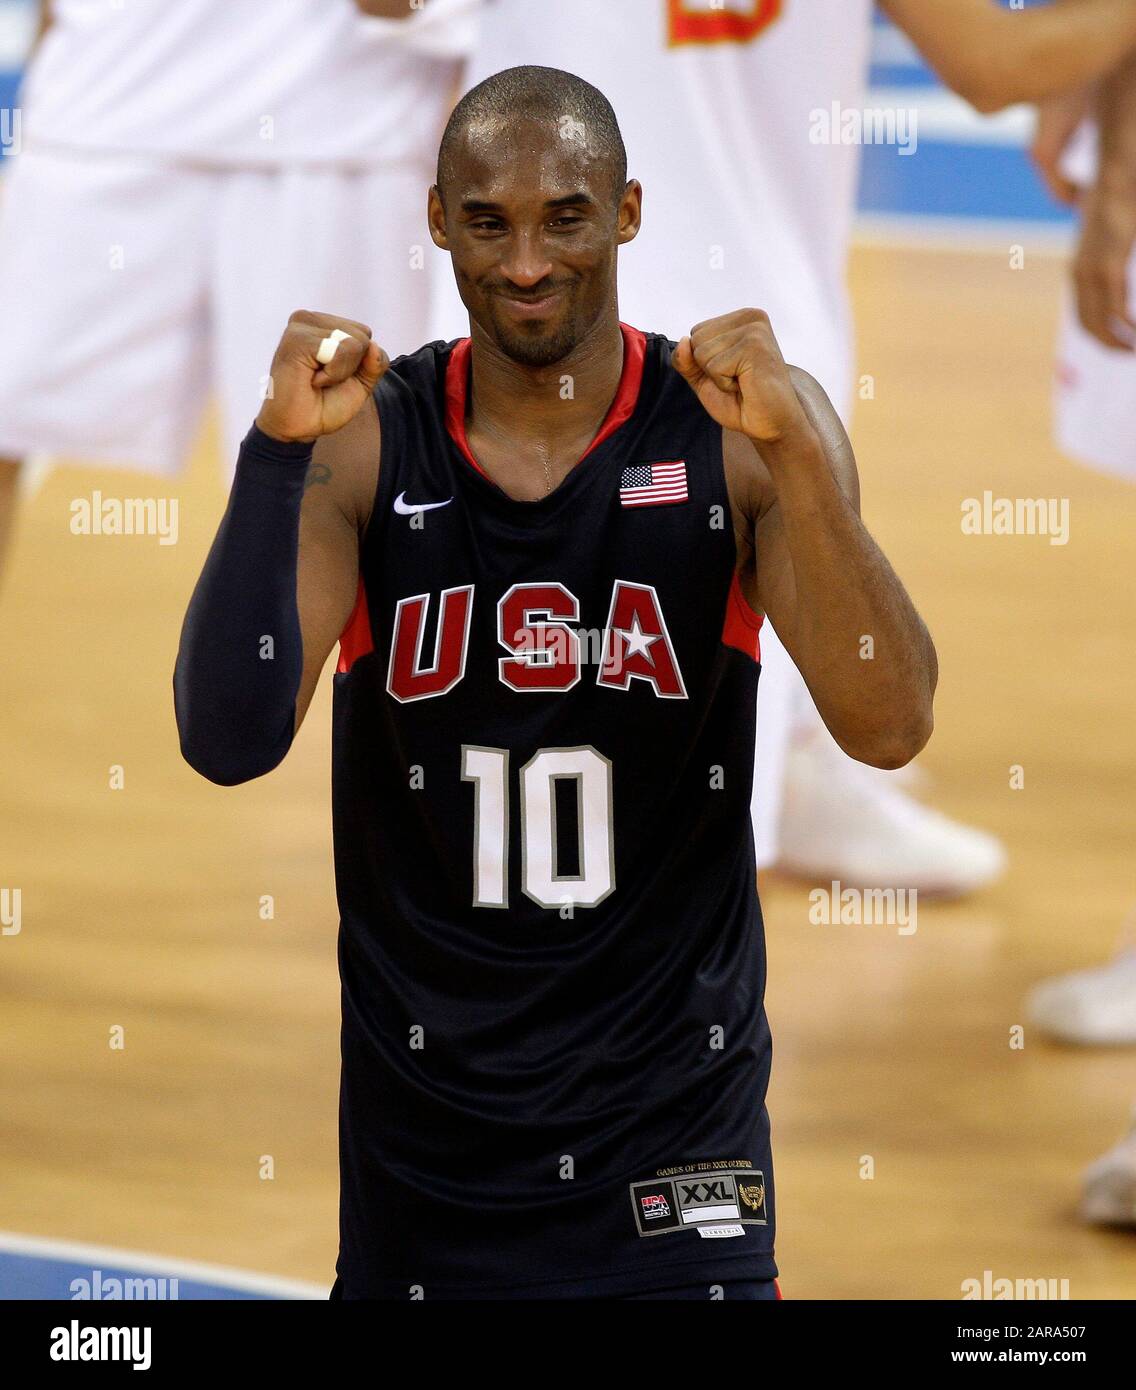 Beijing Beijing, China. 24th Aug, 2008. RAU // BRYANT JUB A2408 RAU.JPG, BEIJING, CHINA, 08/24/2008, Kobe BRYANT, USA, the USA are Olympic champions in basketball, men's basketball finals, SPAIN - United States, SPA ESP - USA, 107 - 118, Olympic Summer Games Beijing 2008, Summer Olympics, Summer Olympics 2008 in Beijing, Olympics, | usage worldwide Credit: dpa/Alamy Live News Stock Photo